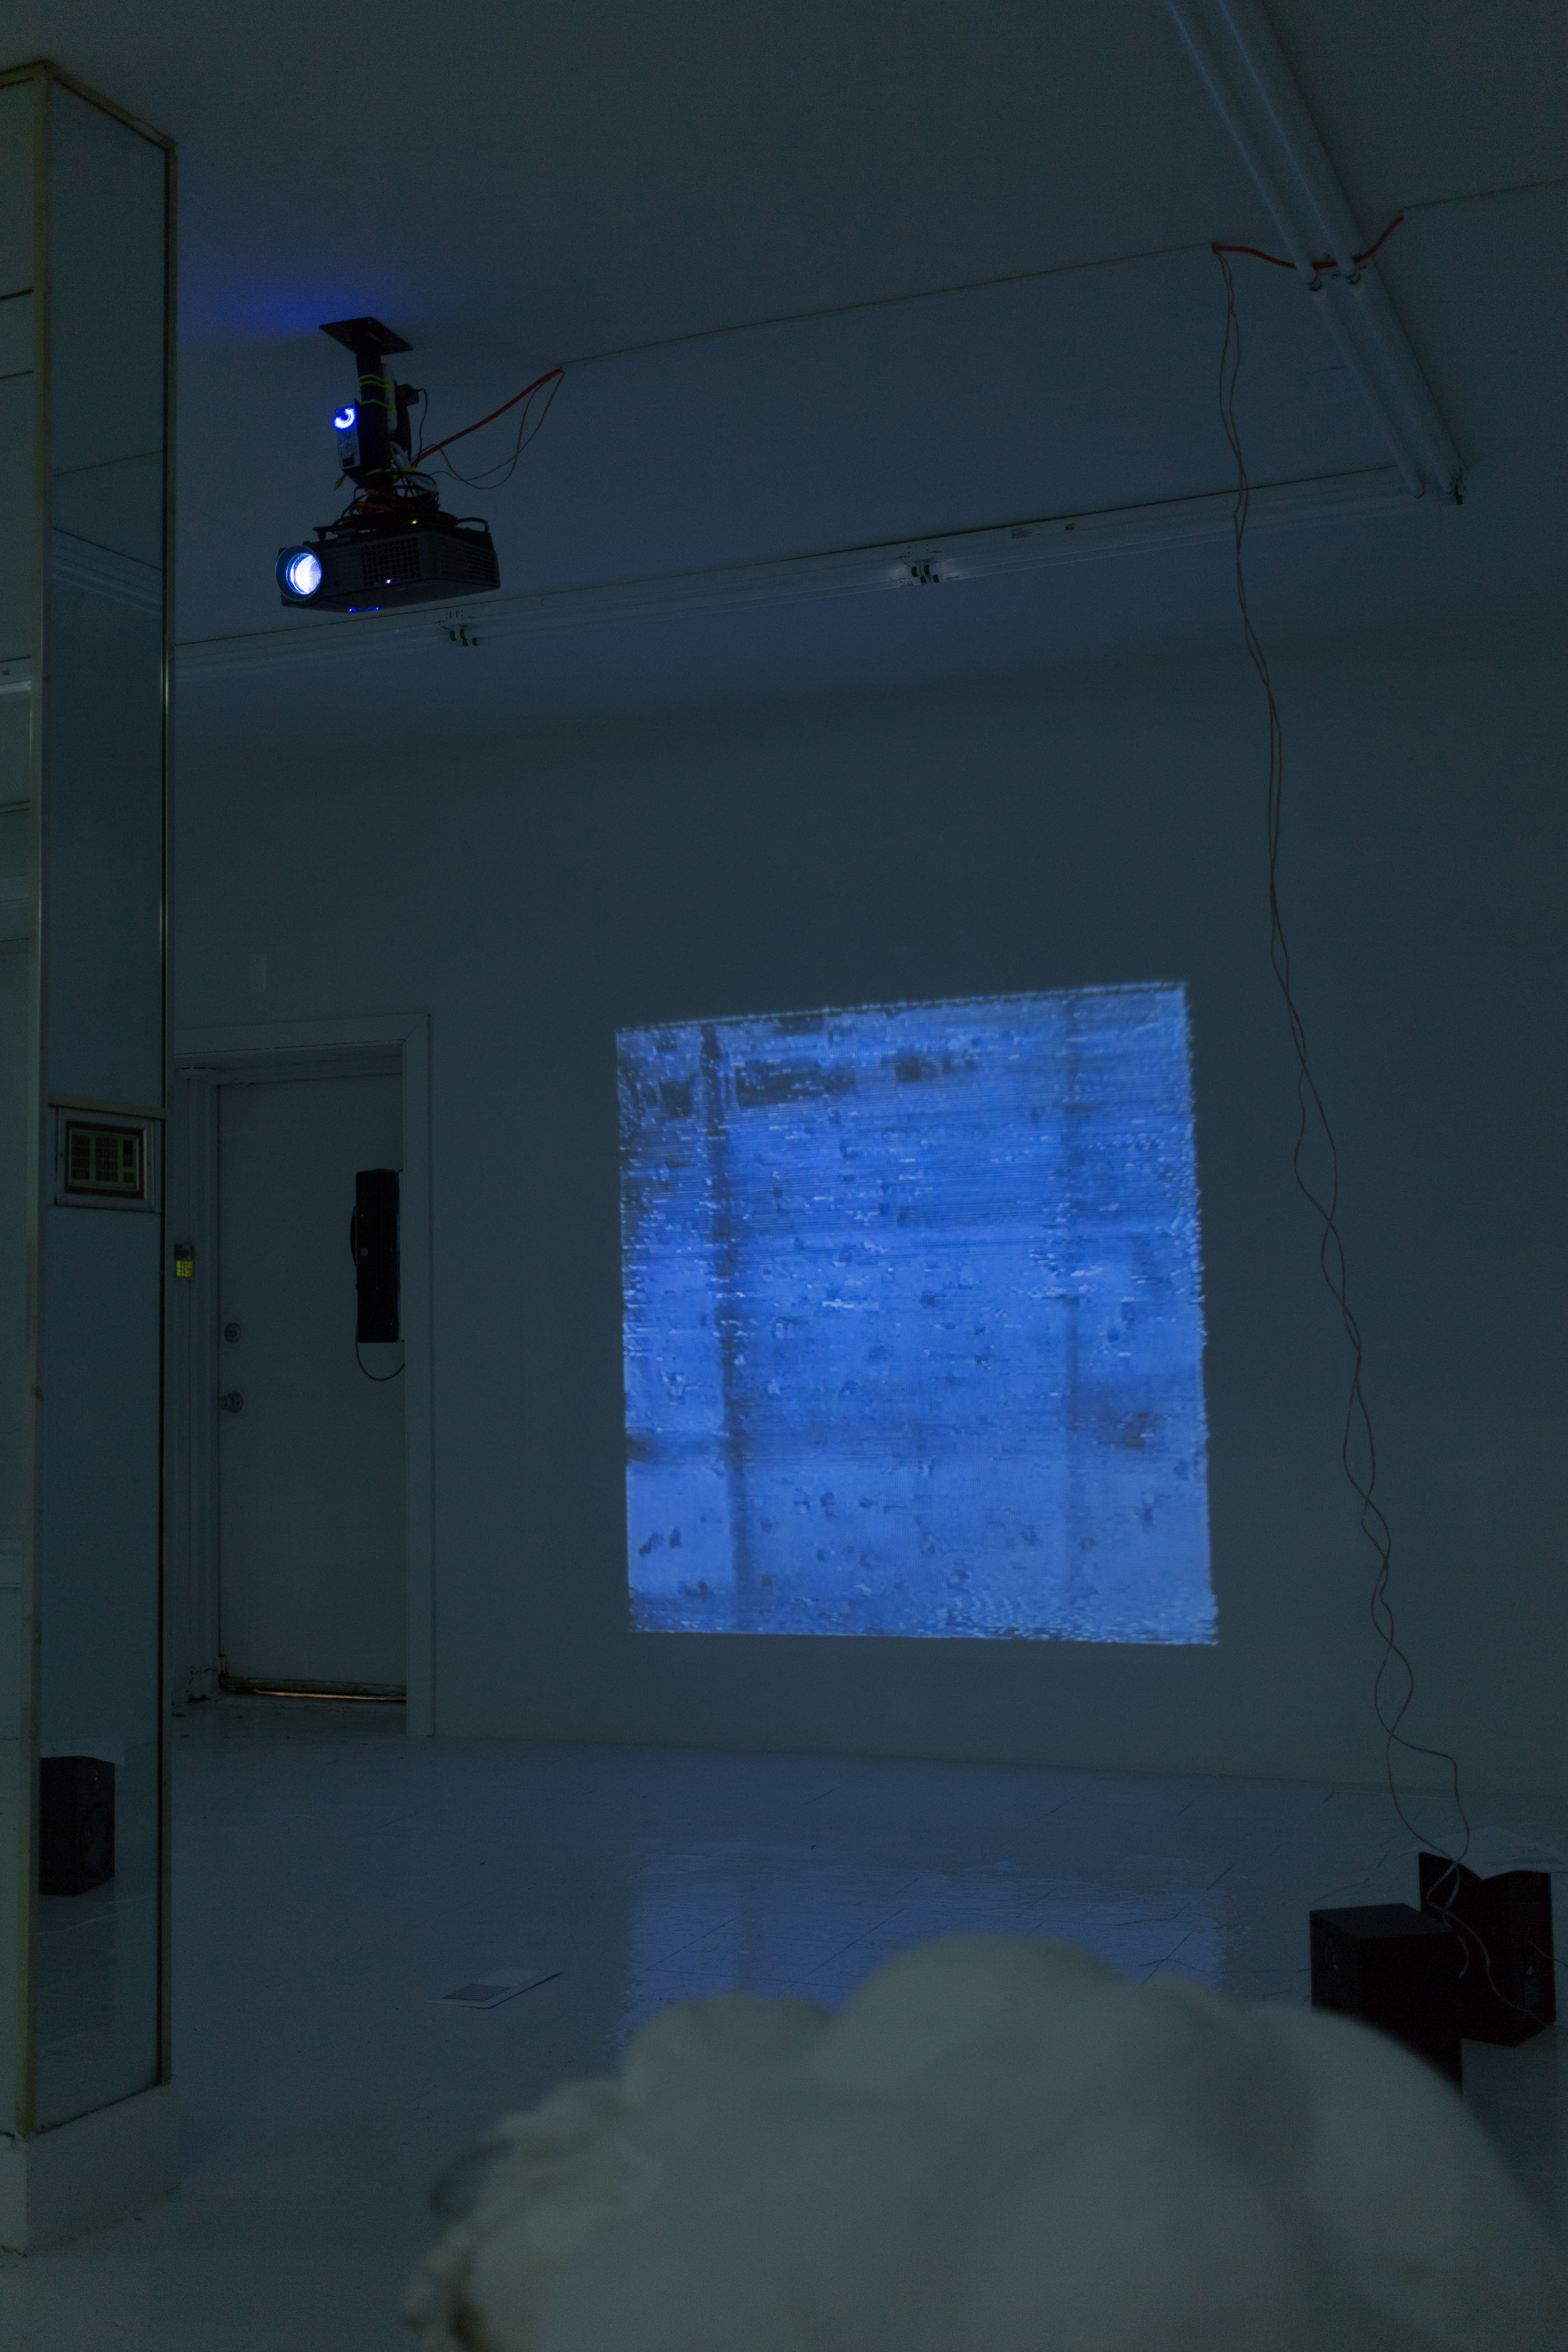 The projector is pointed and the mirror, so the projection, a video by Orphan Drift, is reflected back onto the wall behind